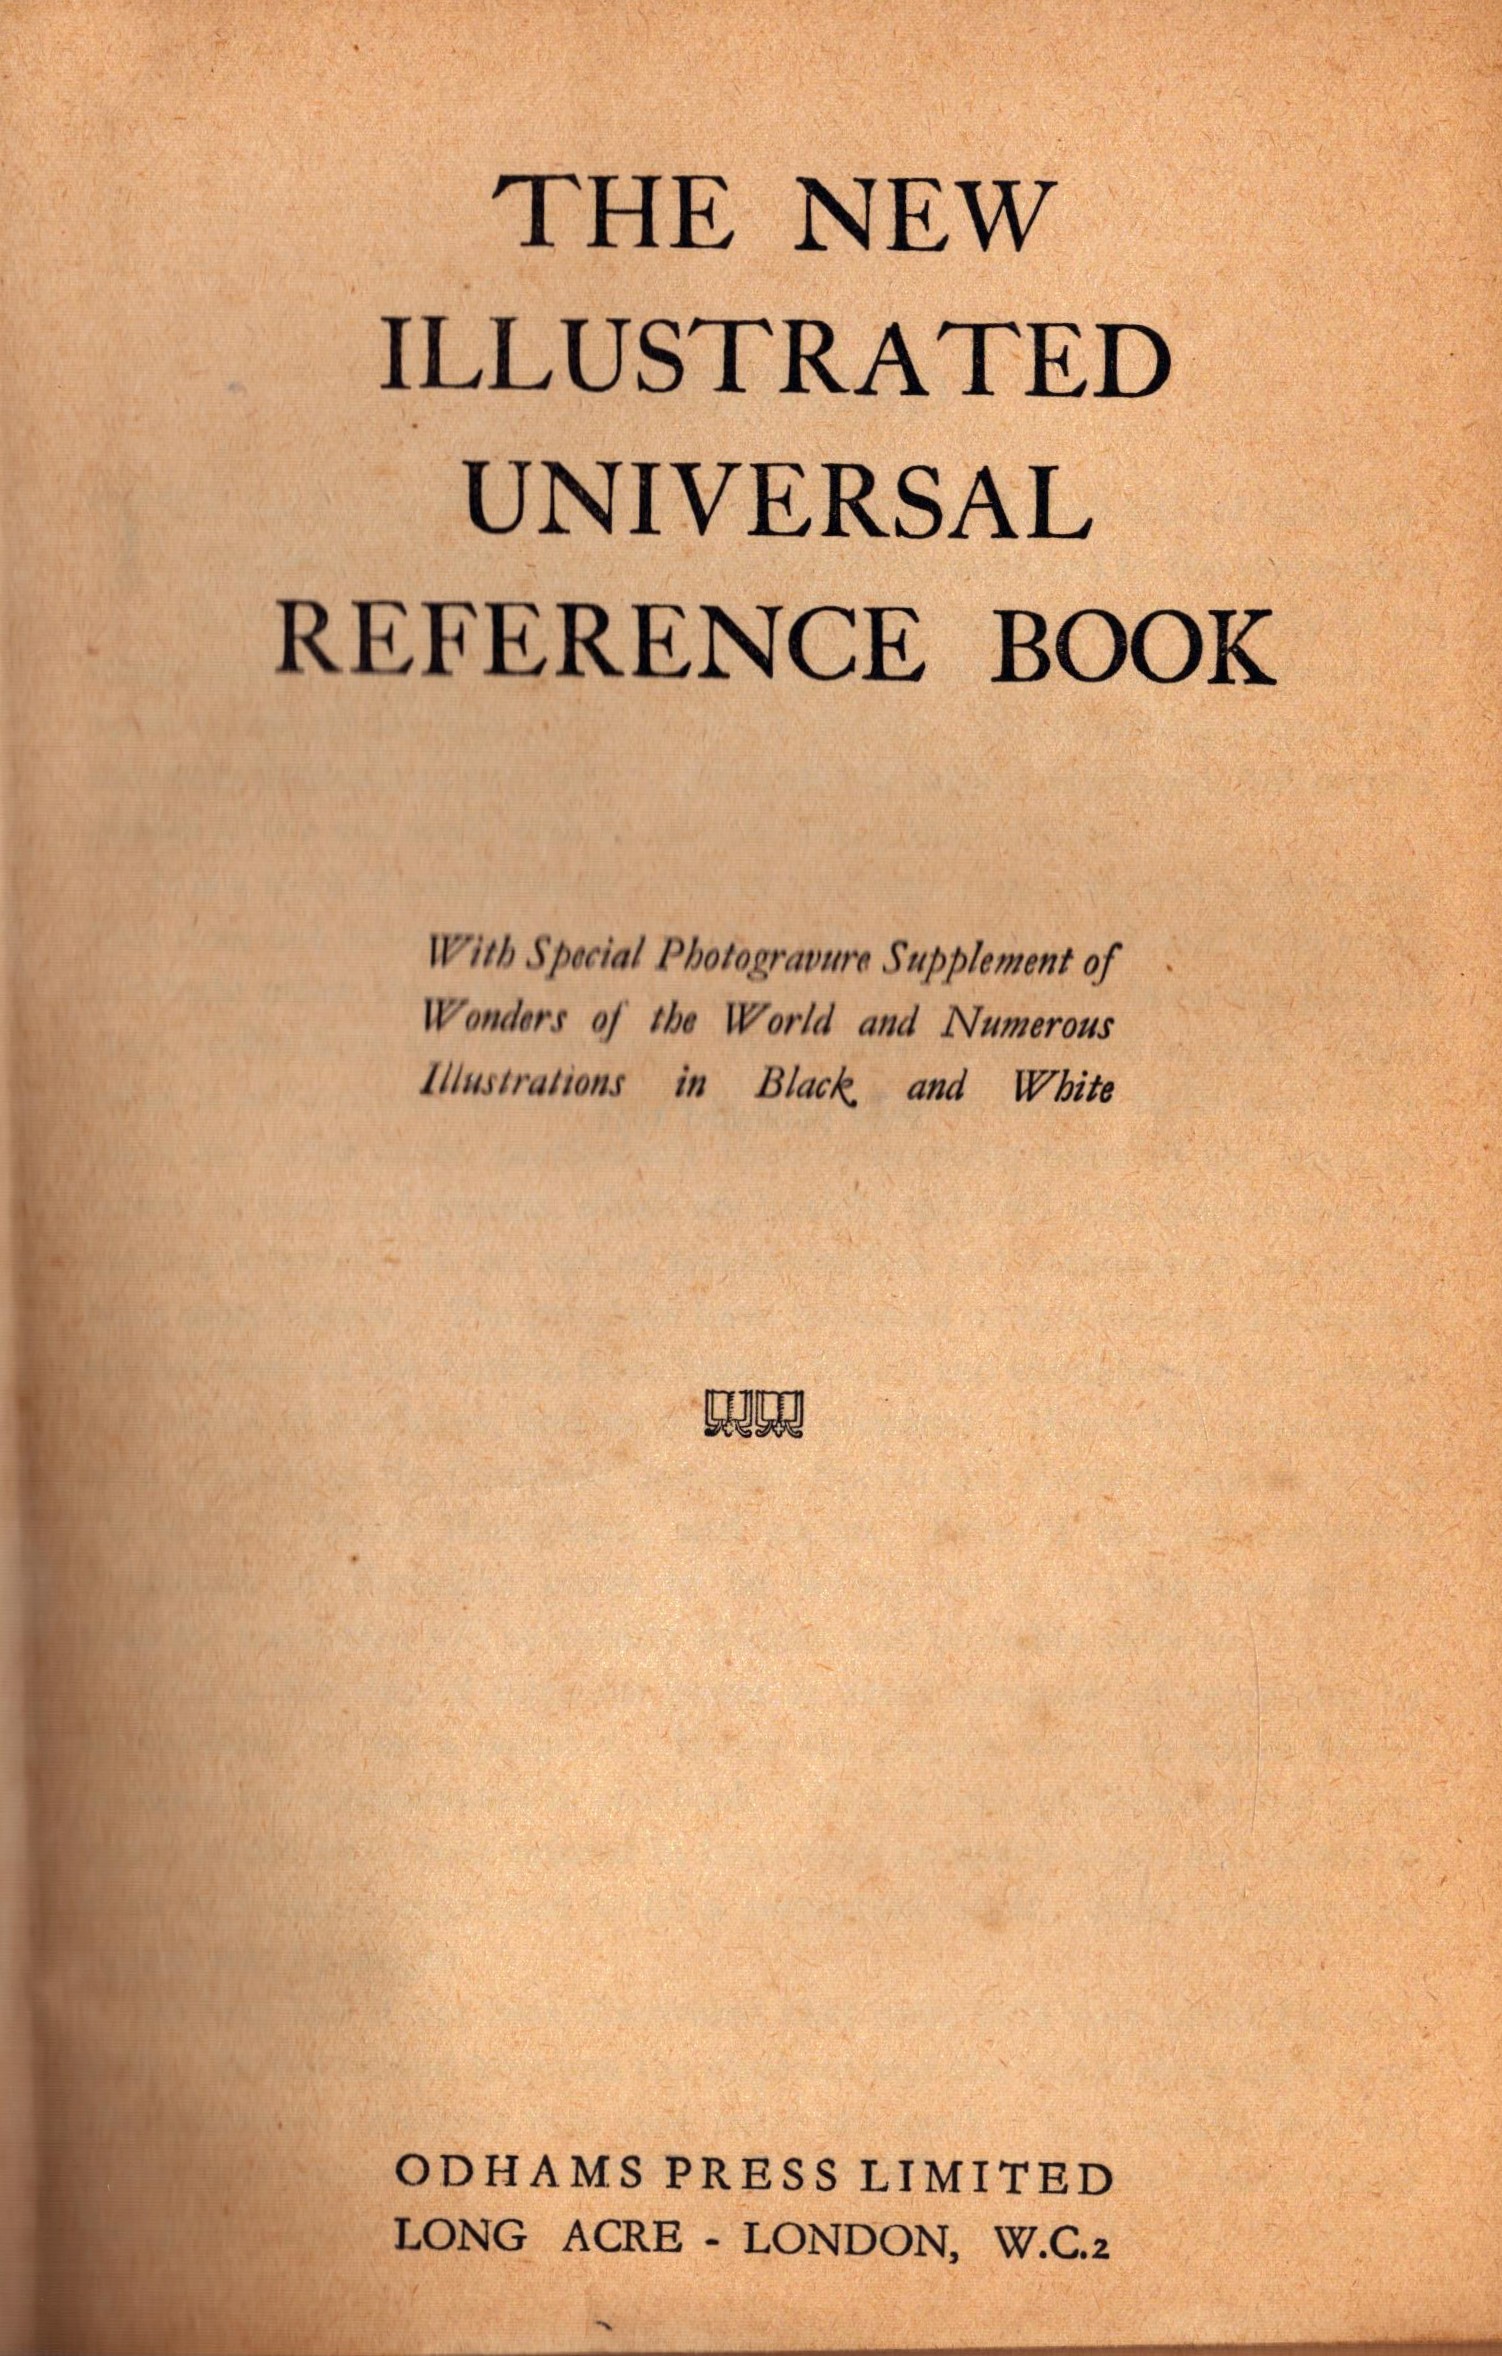 The New Illustrated Universal Reference Book first published in 1933 hardback book. Good - Image 2 of 2